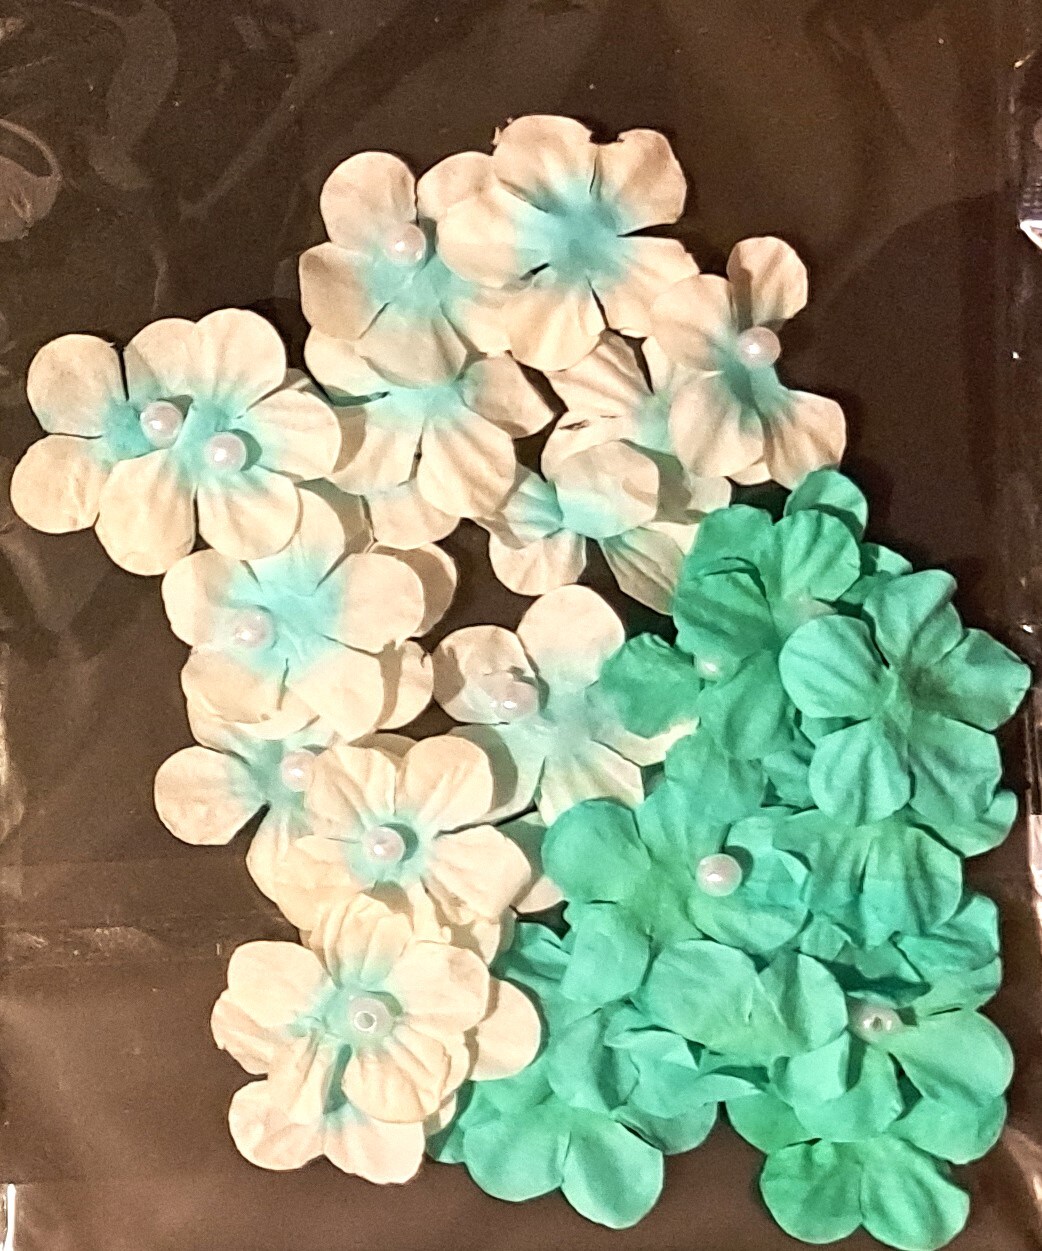 Designer Mini Teal And White Flowers 35 Pieces